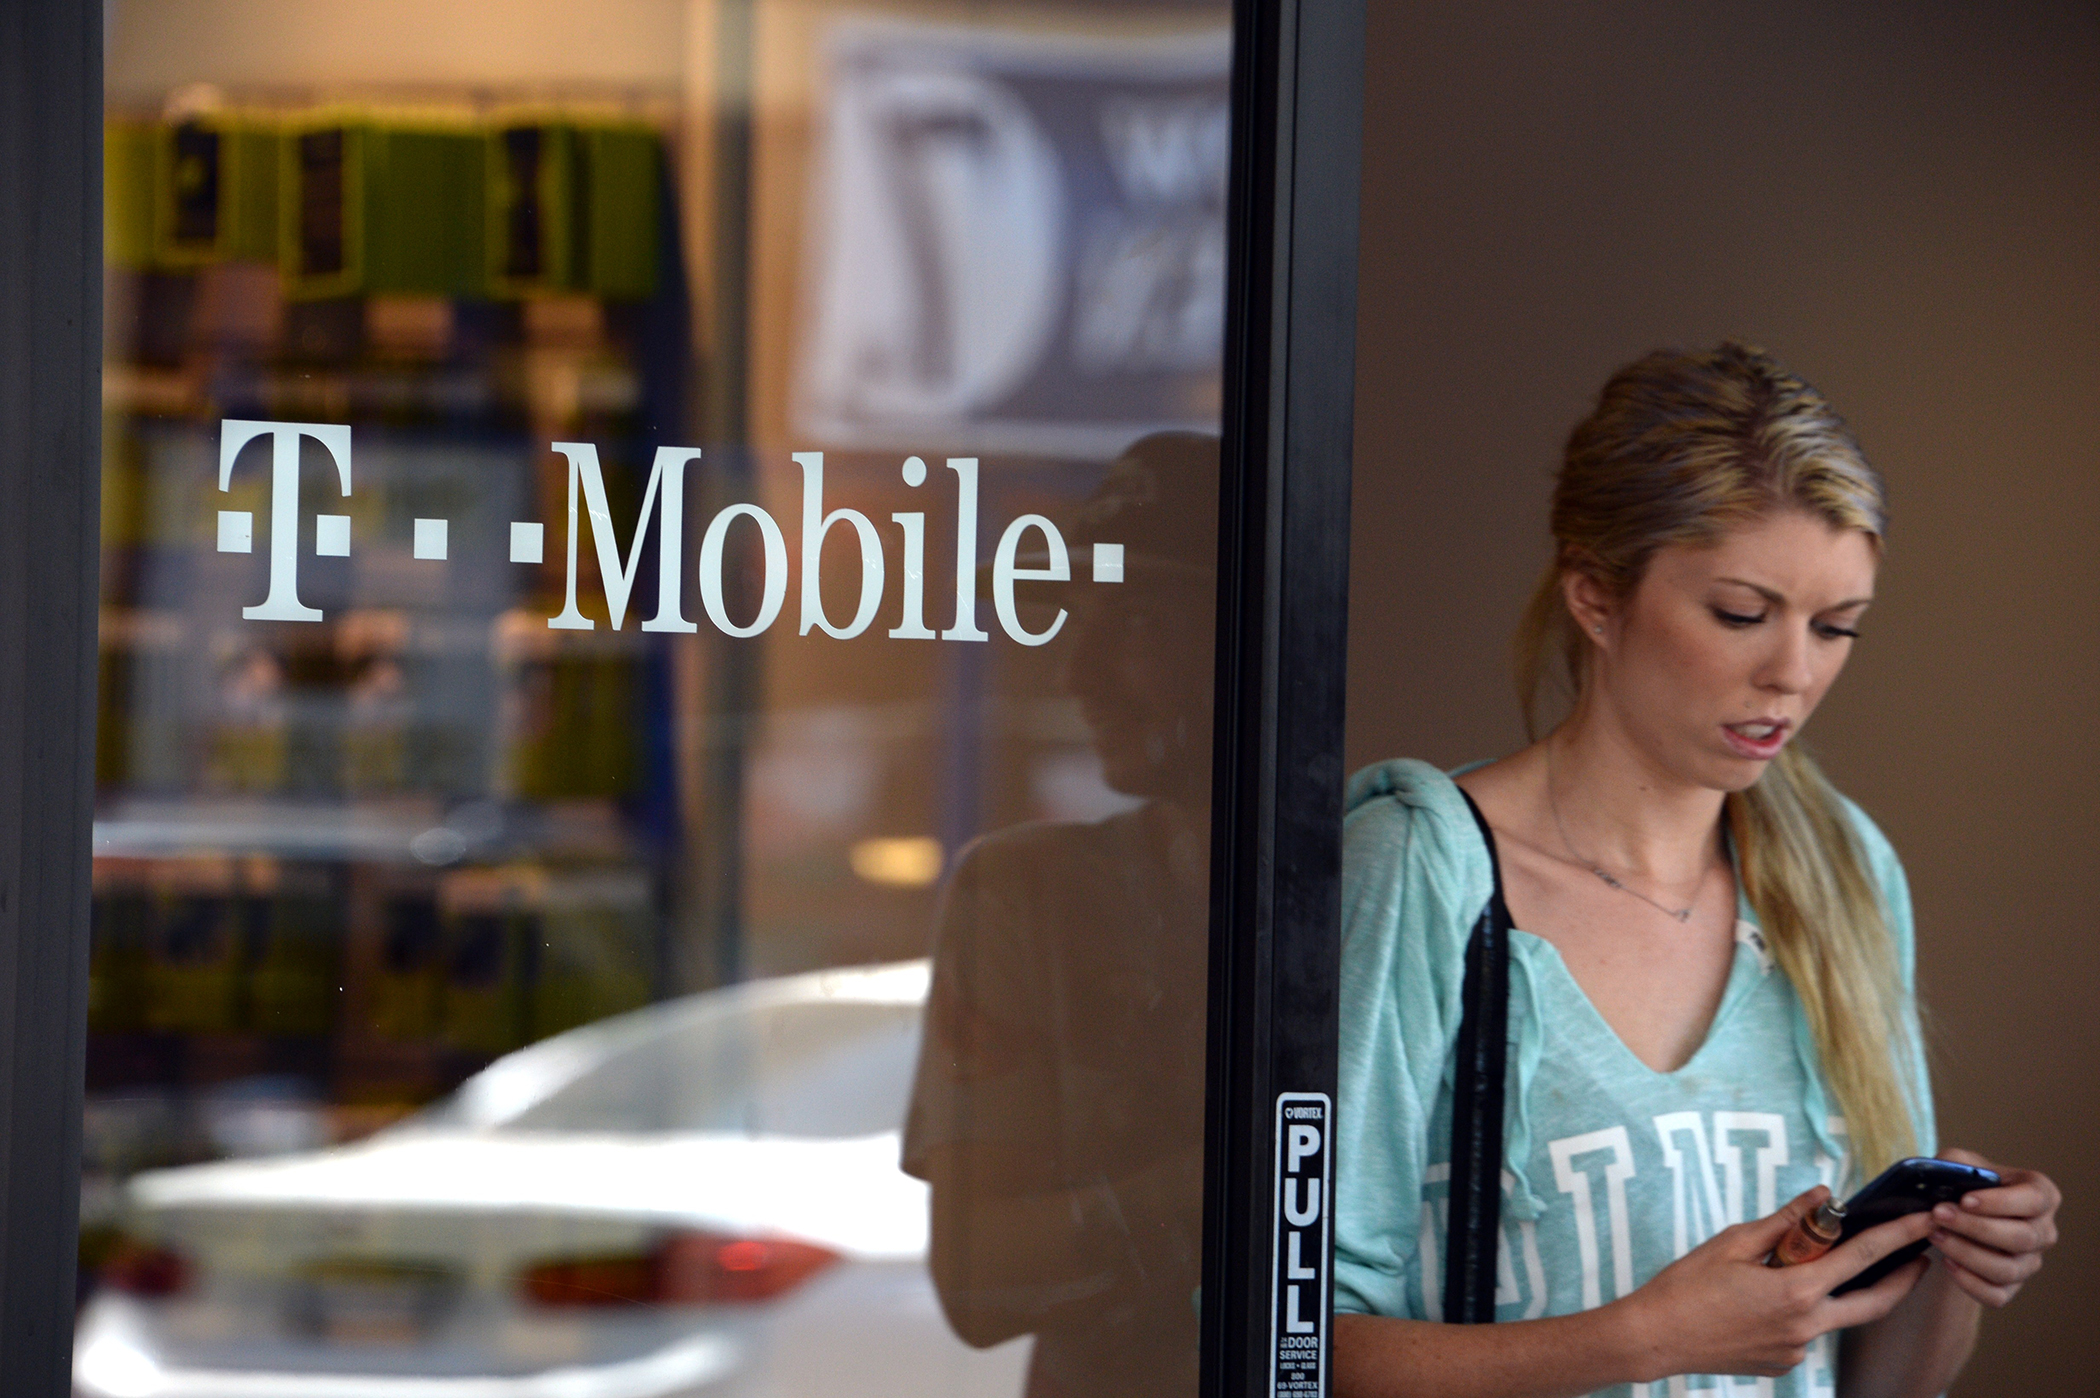 The One Foolproof Thing T-Mobile Customers Can Do To Protect Themselves from Identity Theft